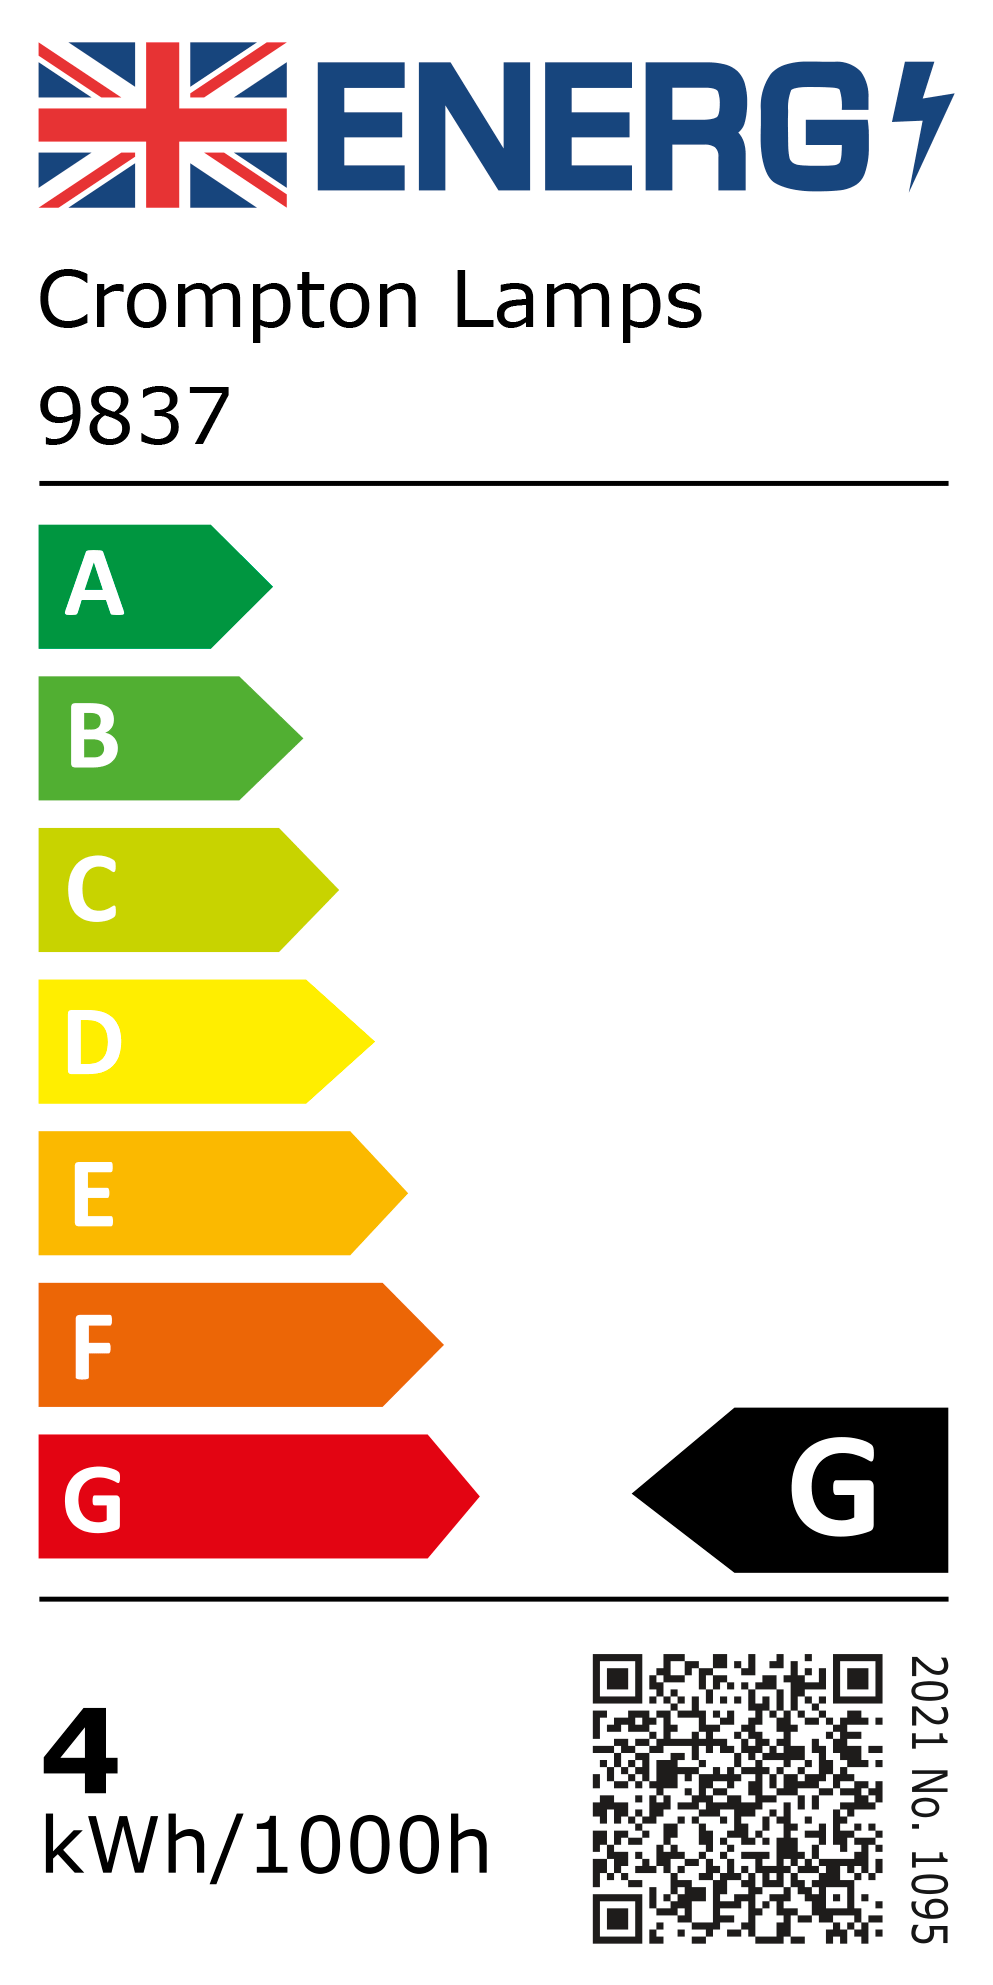 New 2021 Energy Rating Label: Stock Code 9837